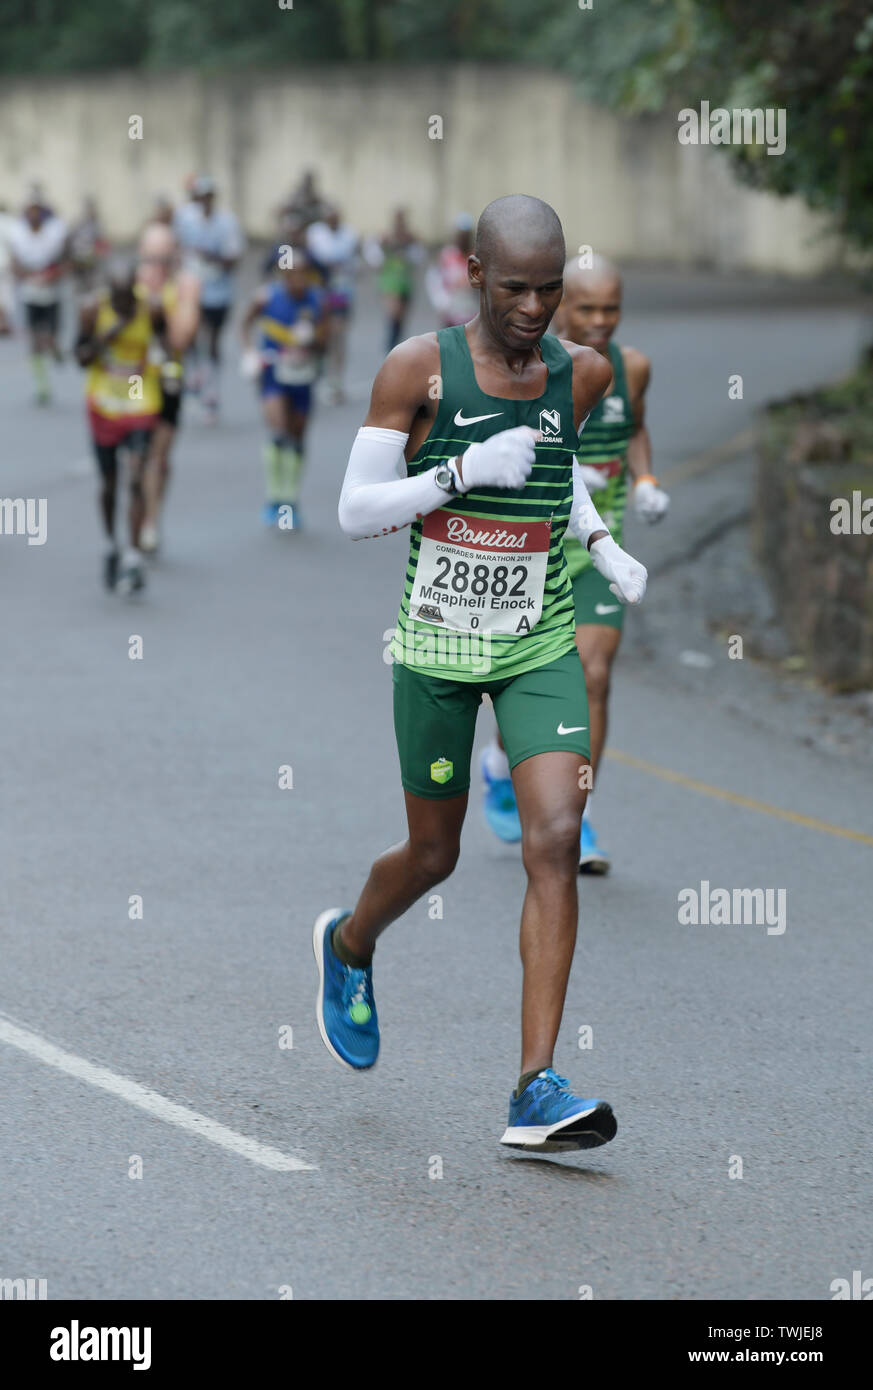 Durban, South Africa, adult man running in Comrades Marathon, 2019, runners in competitive race, people, sport, athletics, action Stock Photo